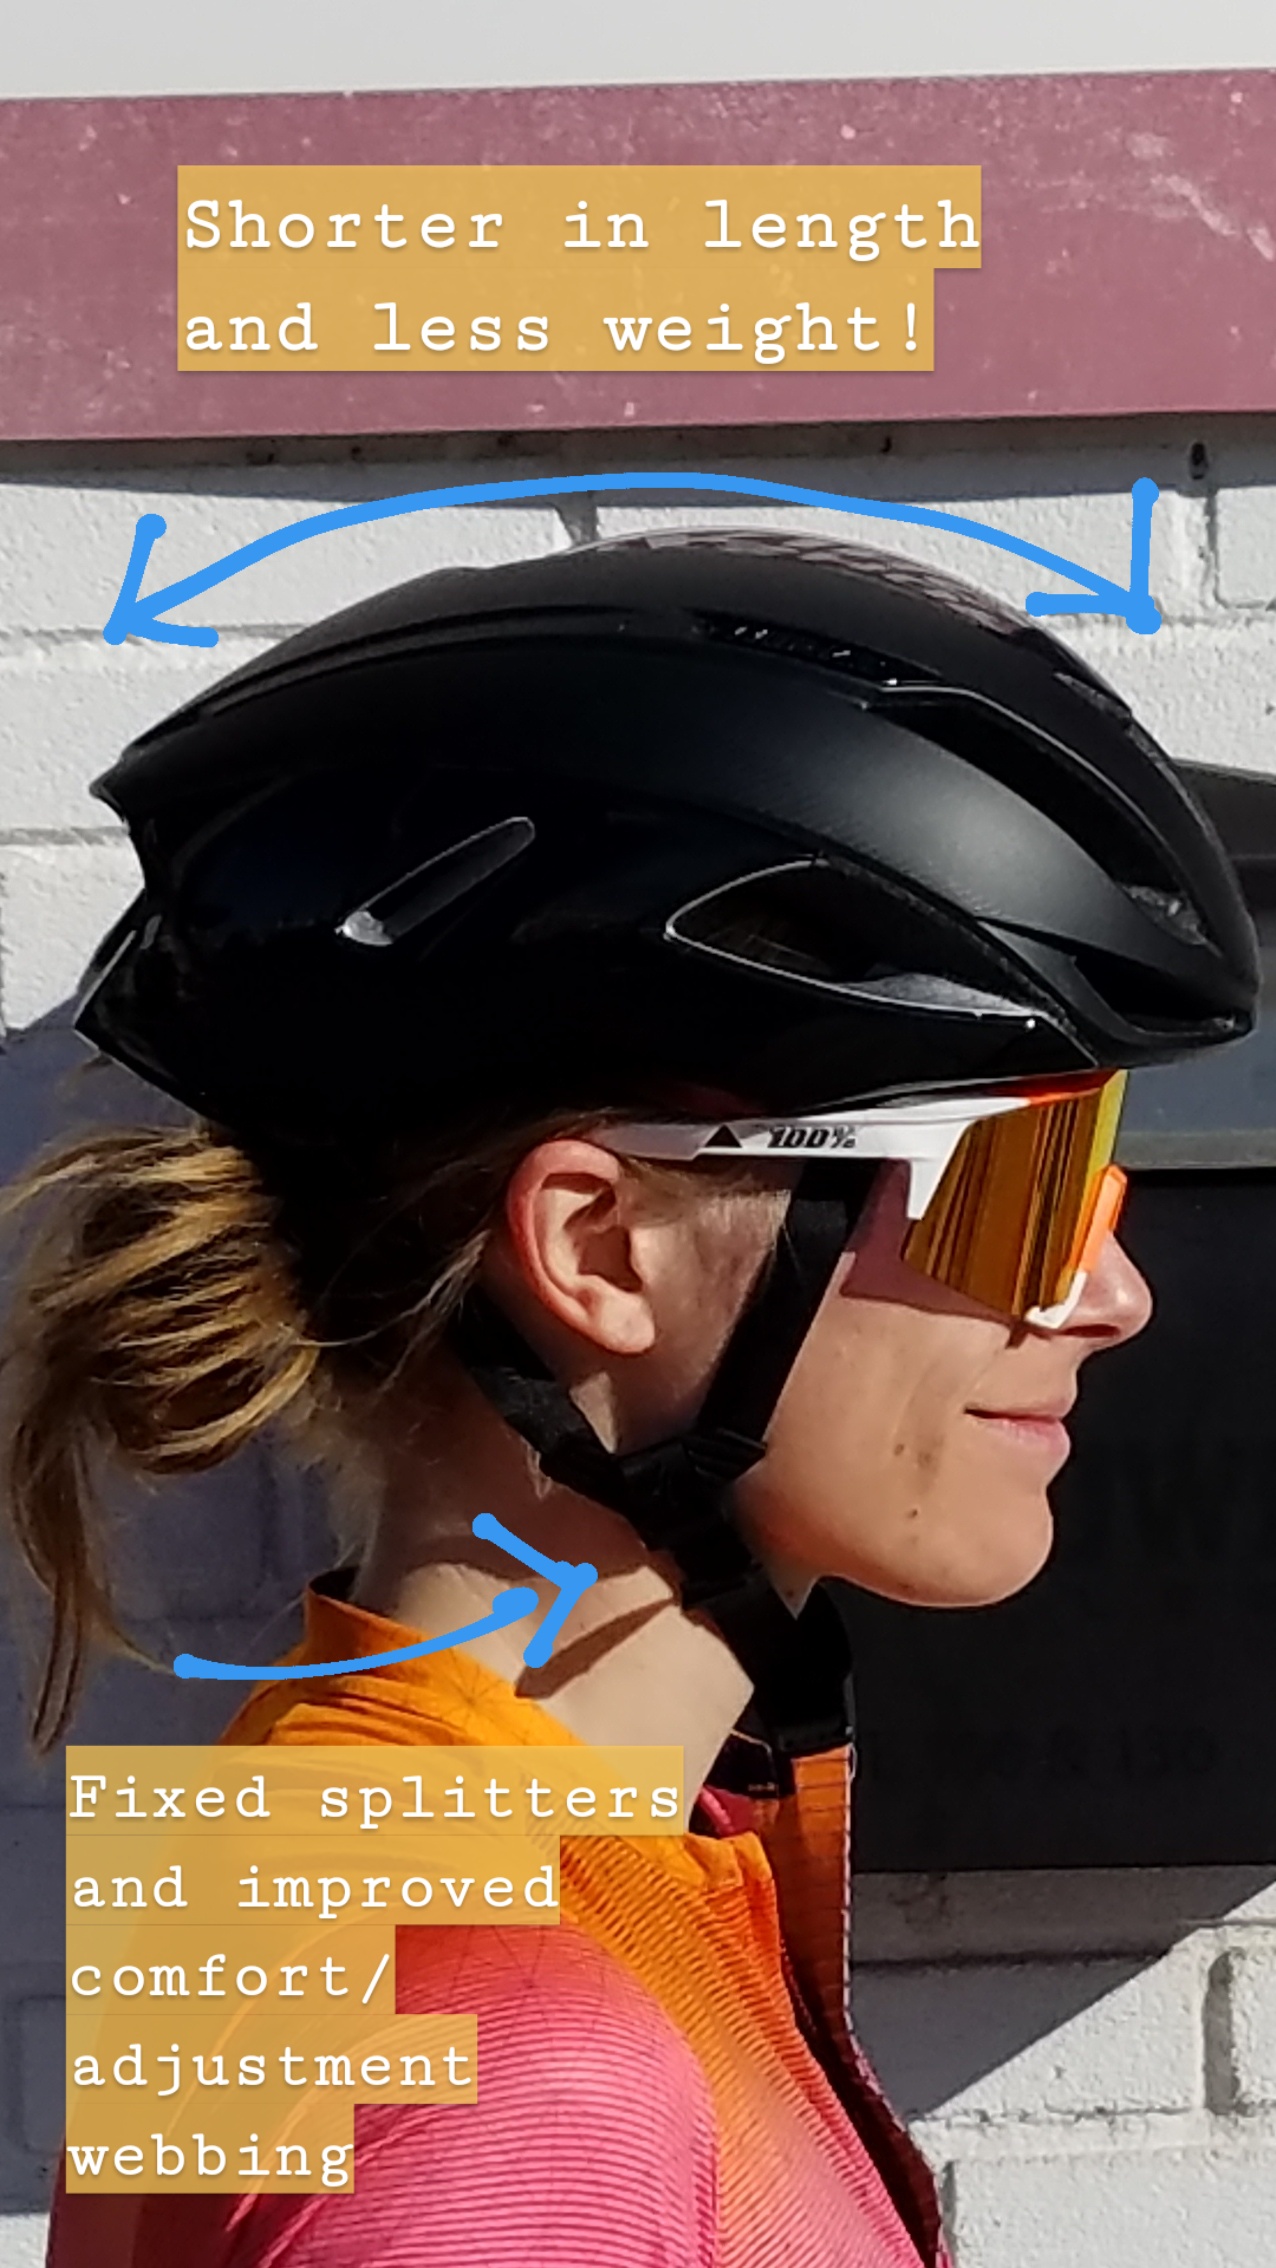 Review: Specialized S-Works Evade II helmet